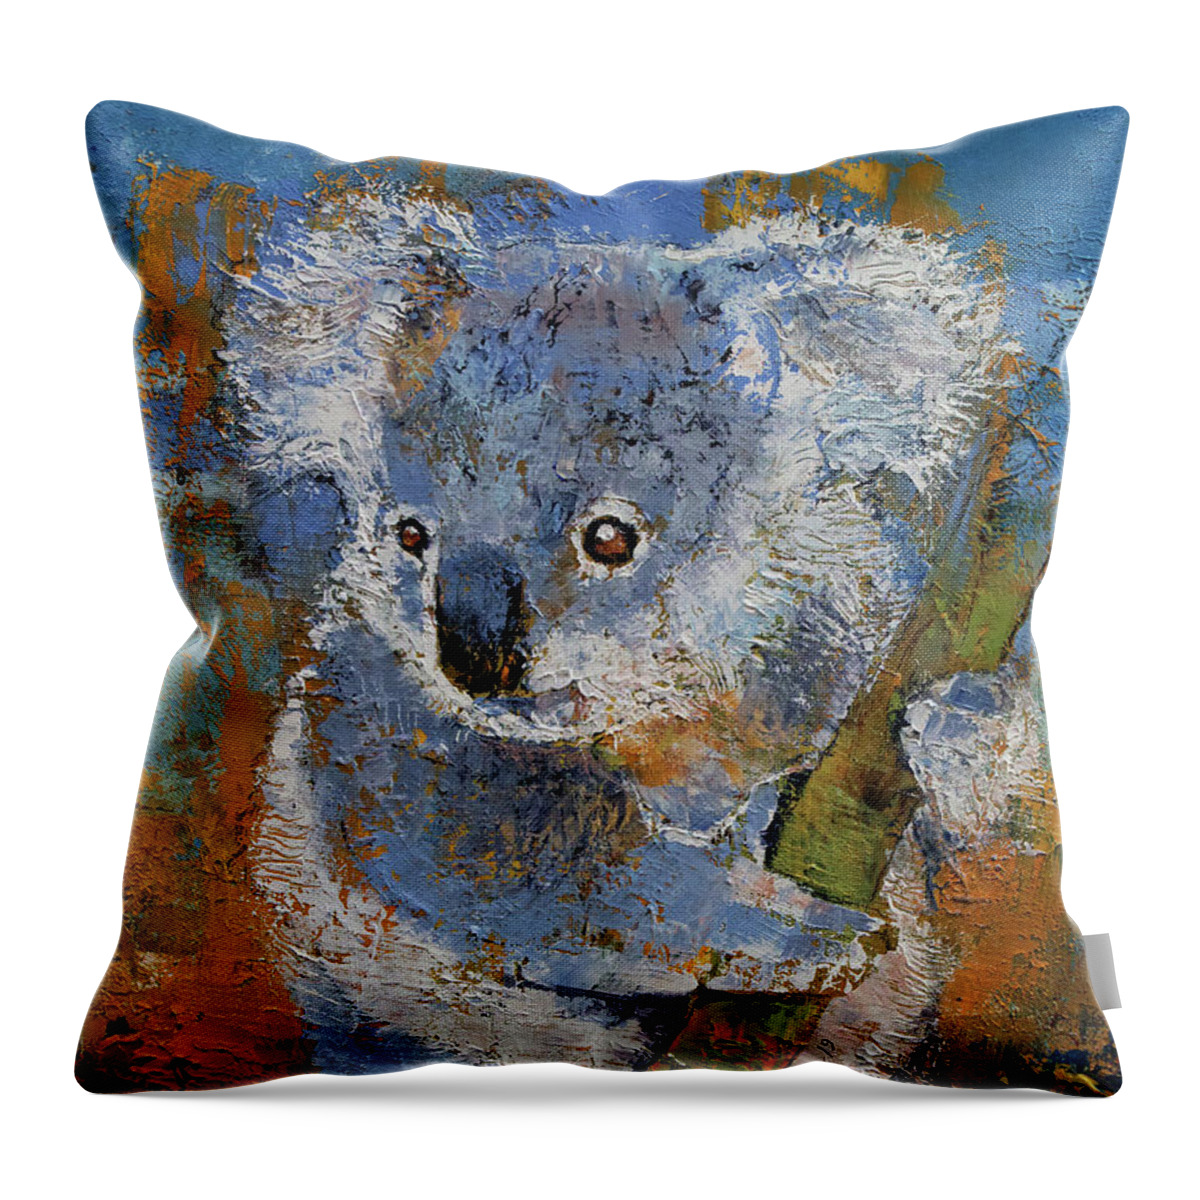 Baby Throw Pillow featuring the painting Koala by Michael Creese